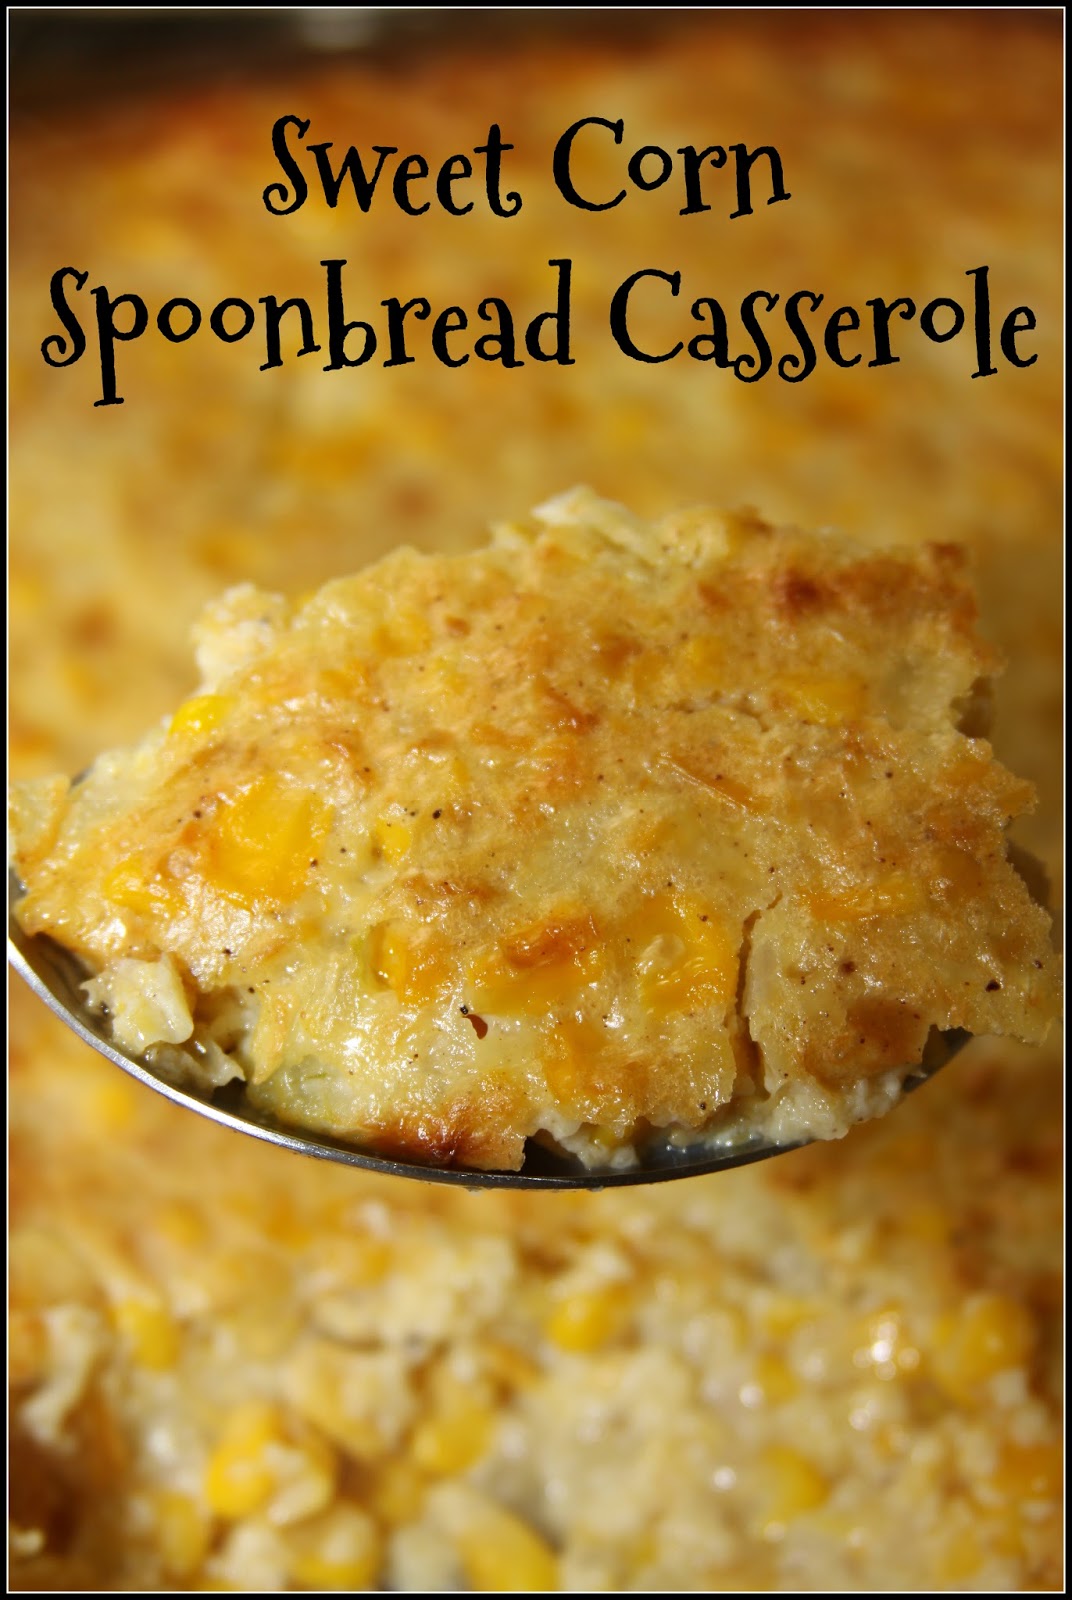 Sweet Corn Spoonbread Casserole - For the Love of Food